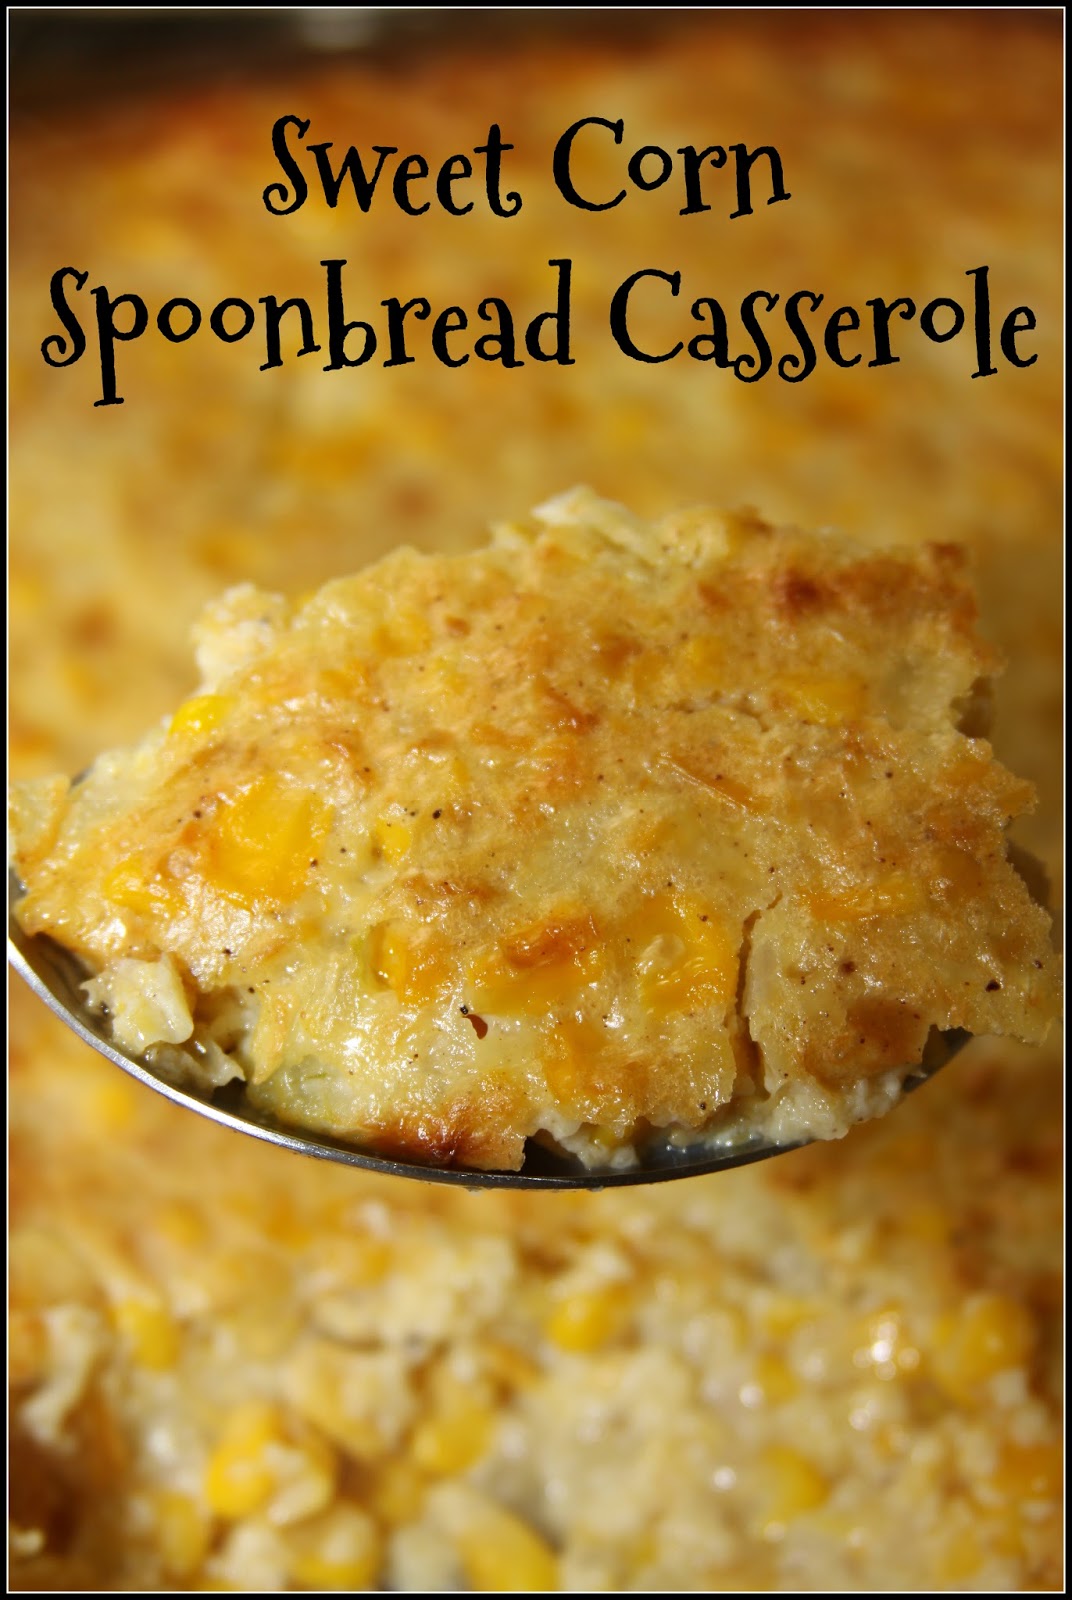 Sweet Corn Spoonbread Casserole - For the Love of Food